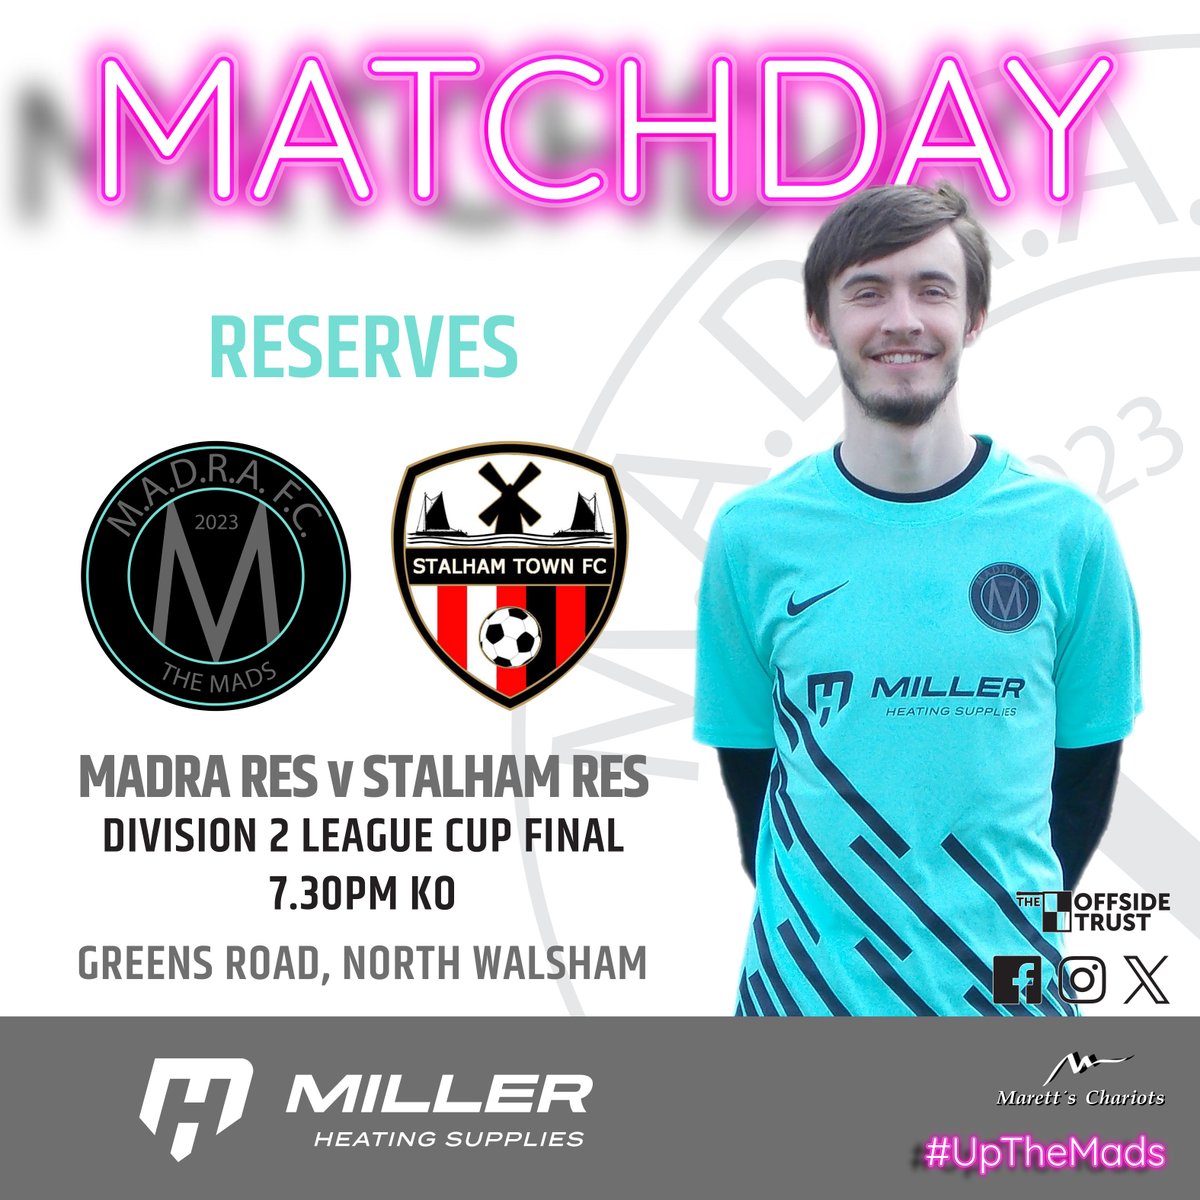 MATCHDAY!
And it all ends in a cup final!
The reserves face @StalhamTown Res in the Division 2 League Cup final at Greens Road.
Come and support the lads in their final game of the season
#UpTheMads #WelcomeToTheMadhouse #Madness #TheMads #MadraFC #NorfolkFootball #OneStepBeyond